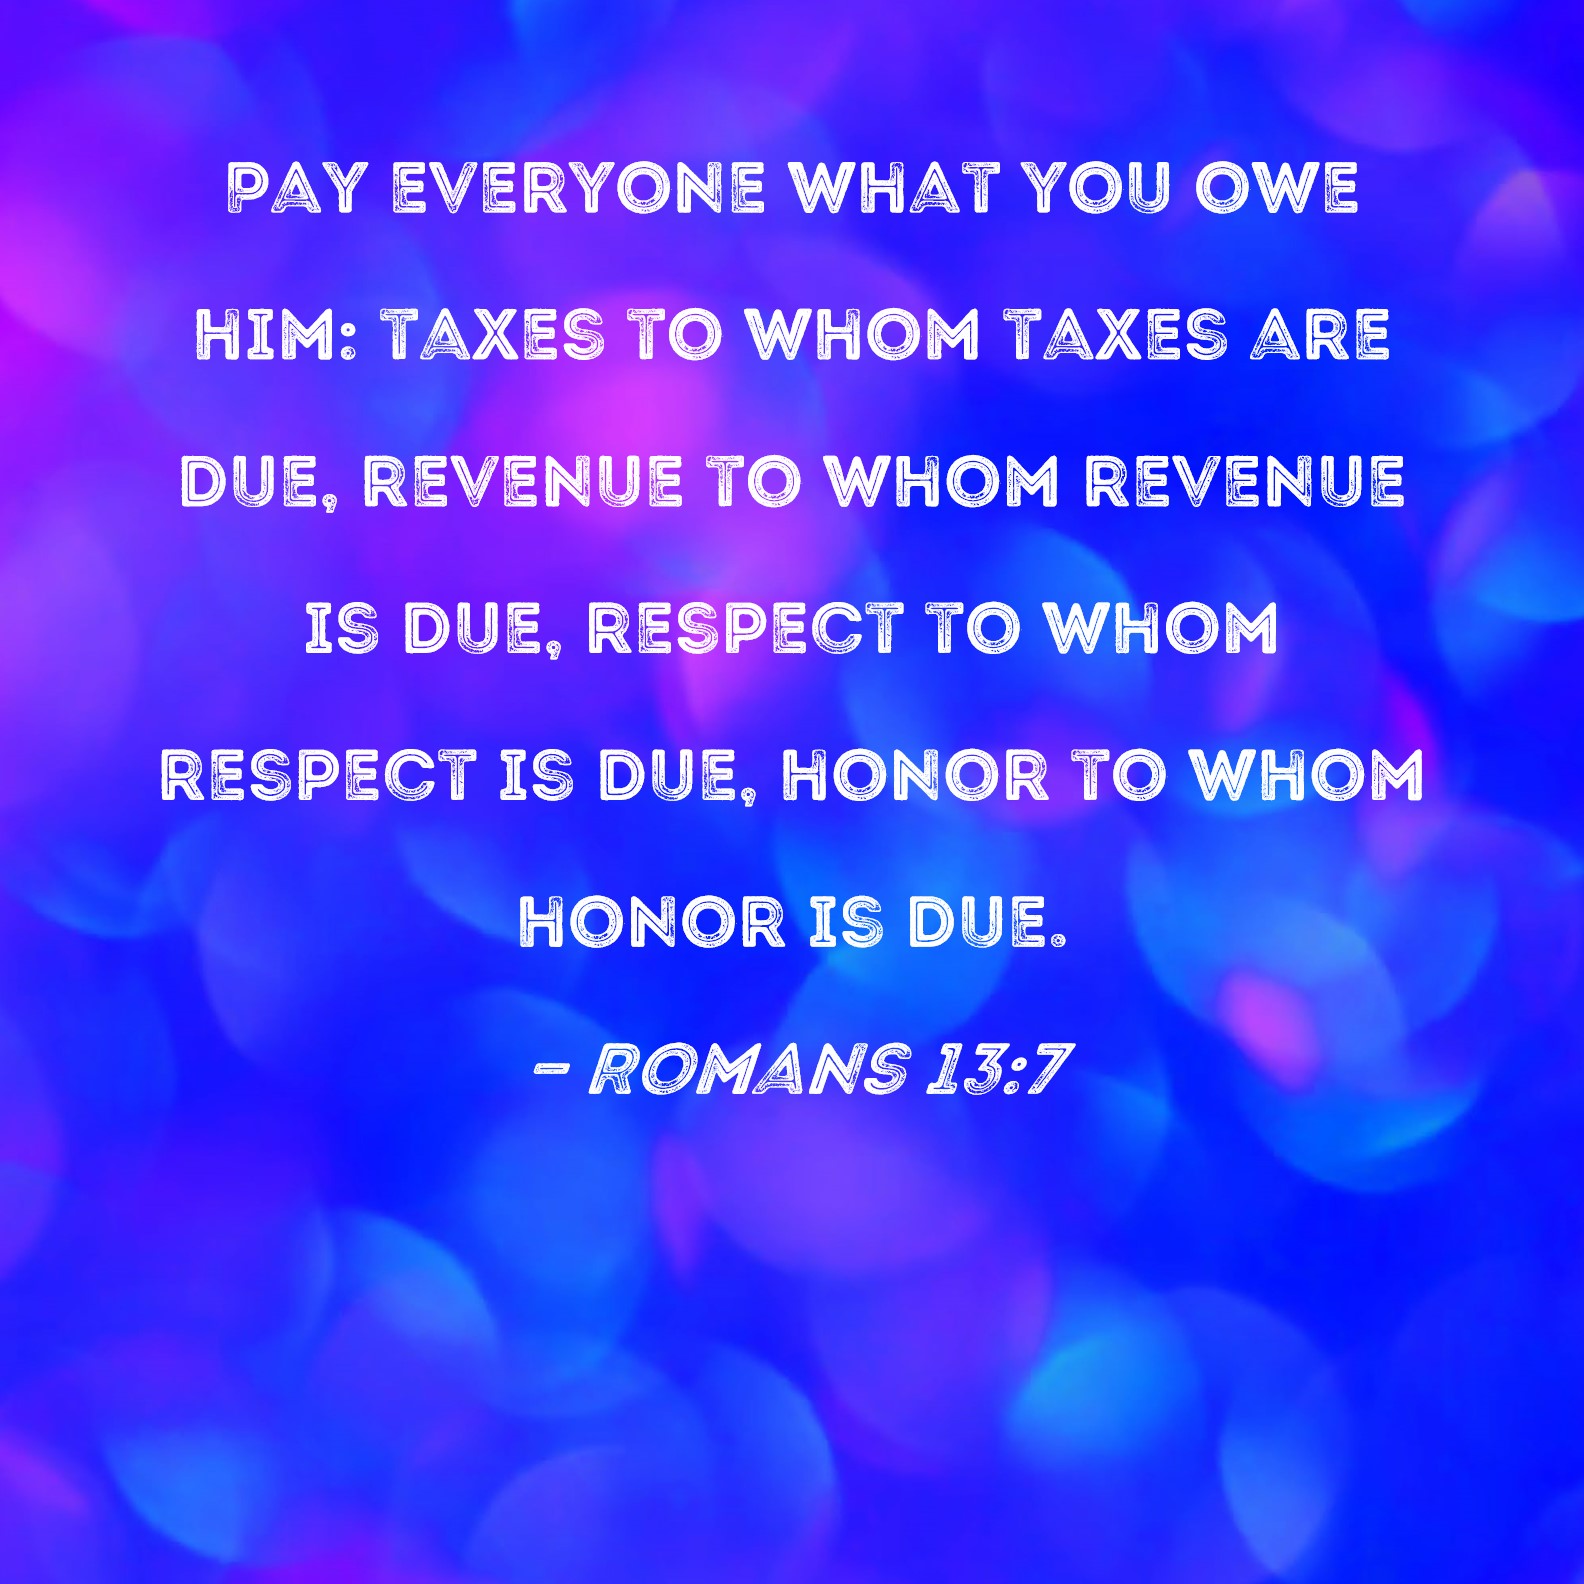 romans-13-7-pay-everyone-what-you-owe-him-taxes-to-whom-taxes-are-due